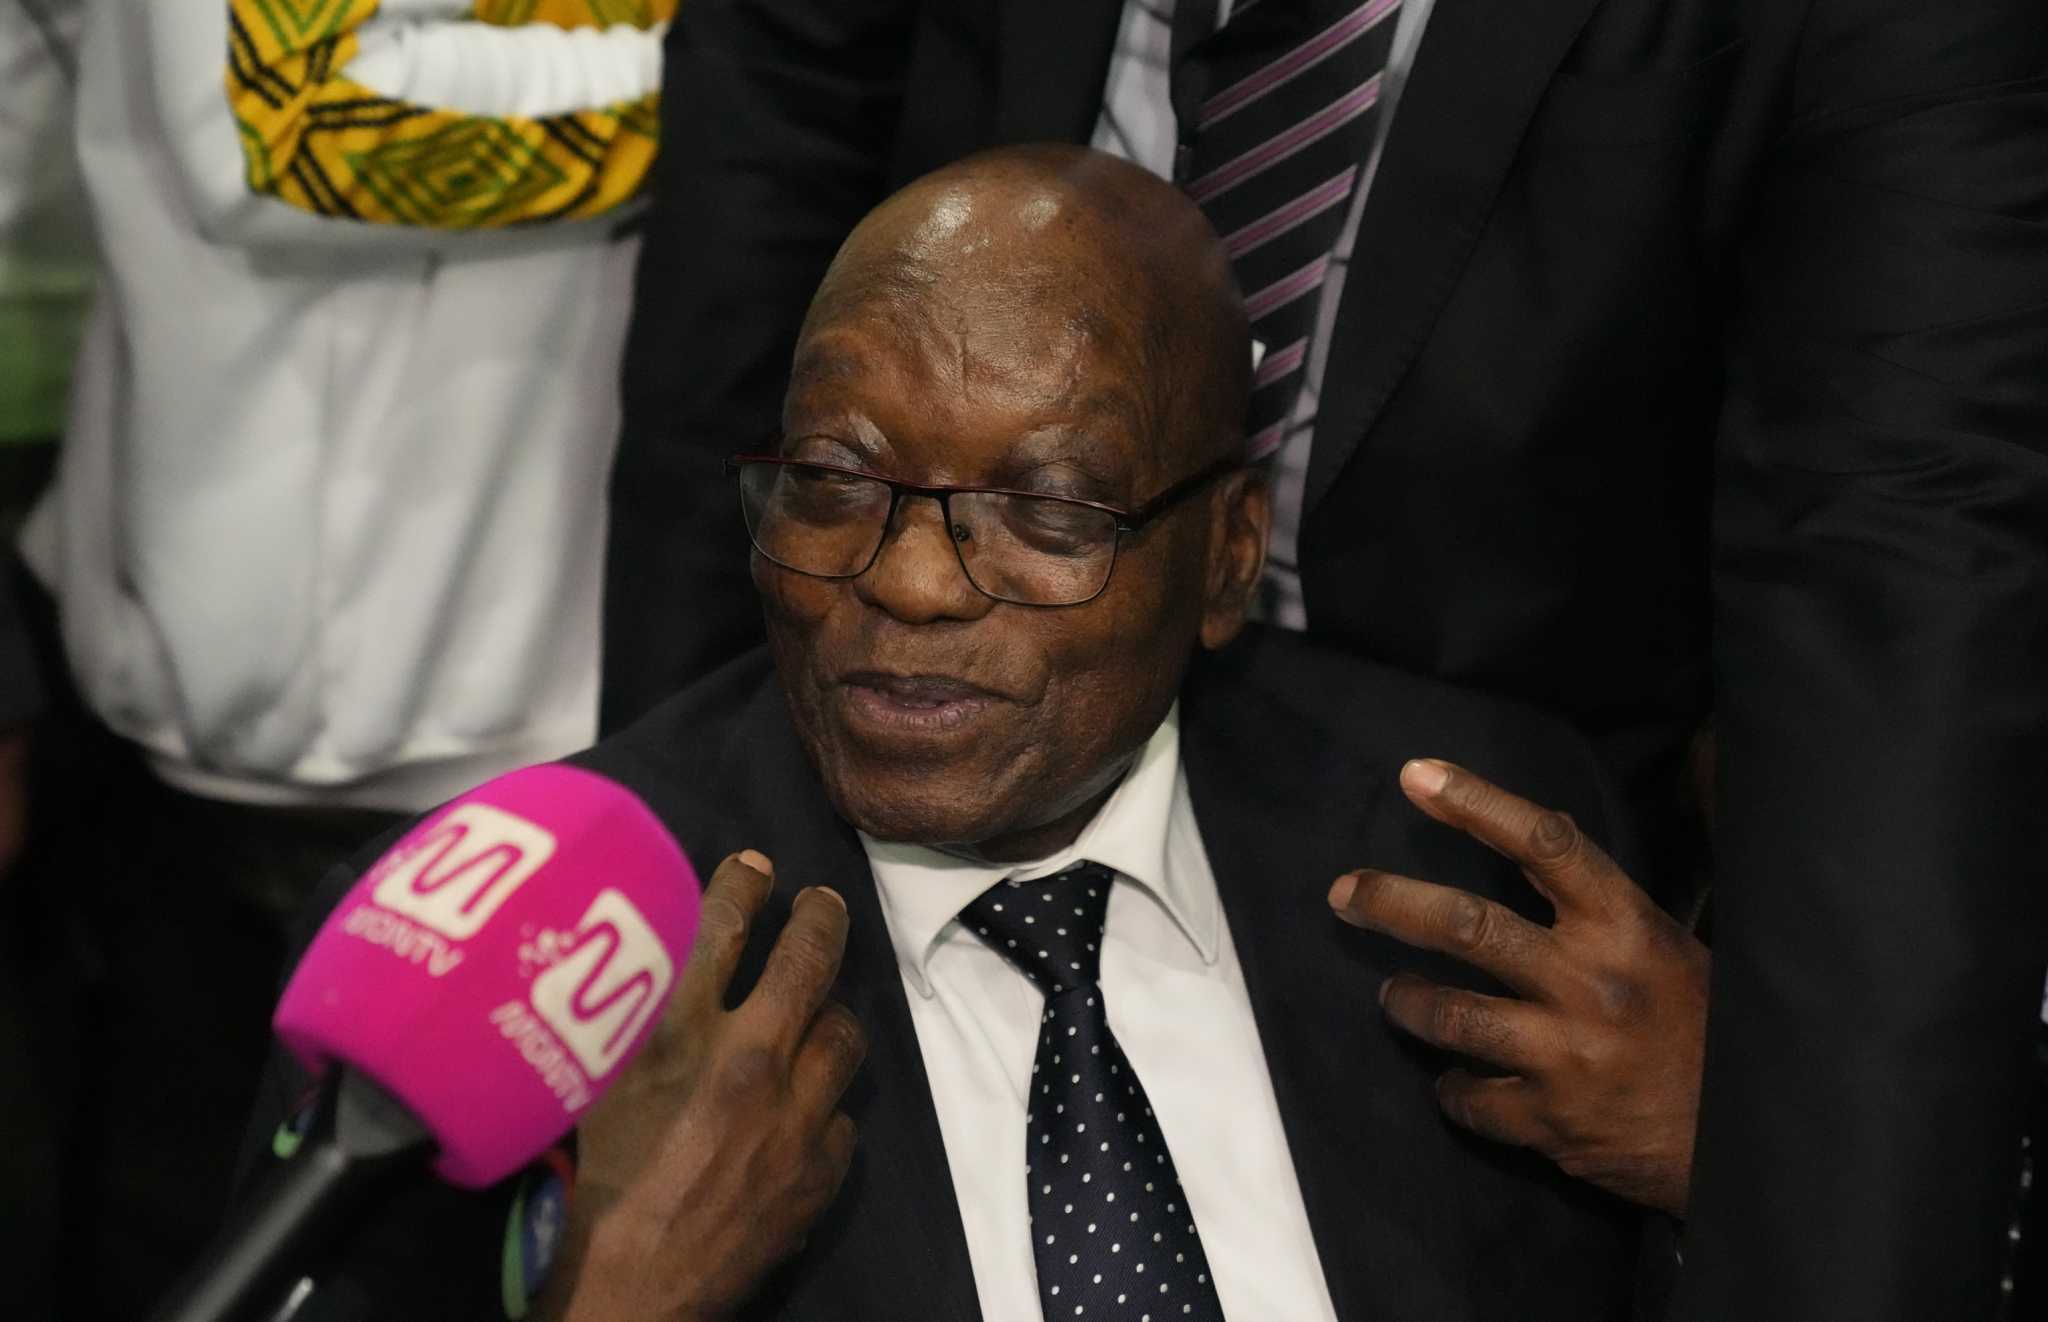 South African political party led by Zuma seeks to halt parliament